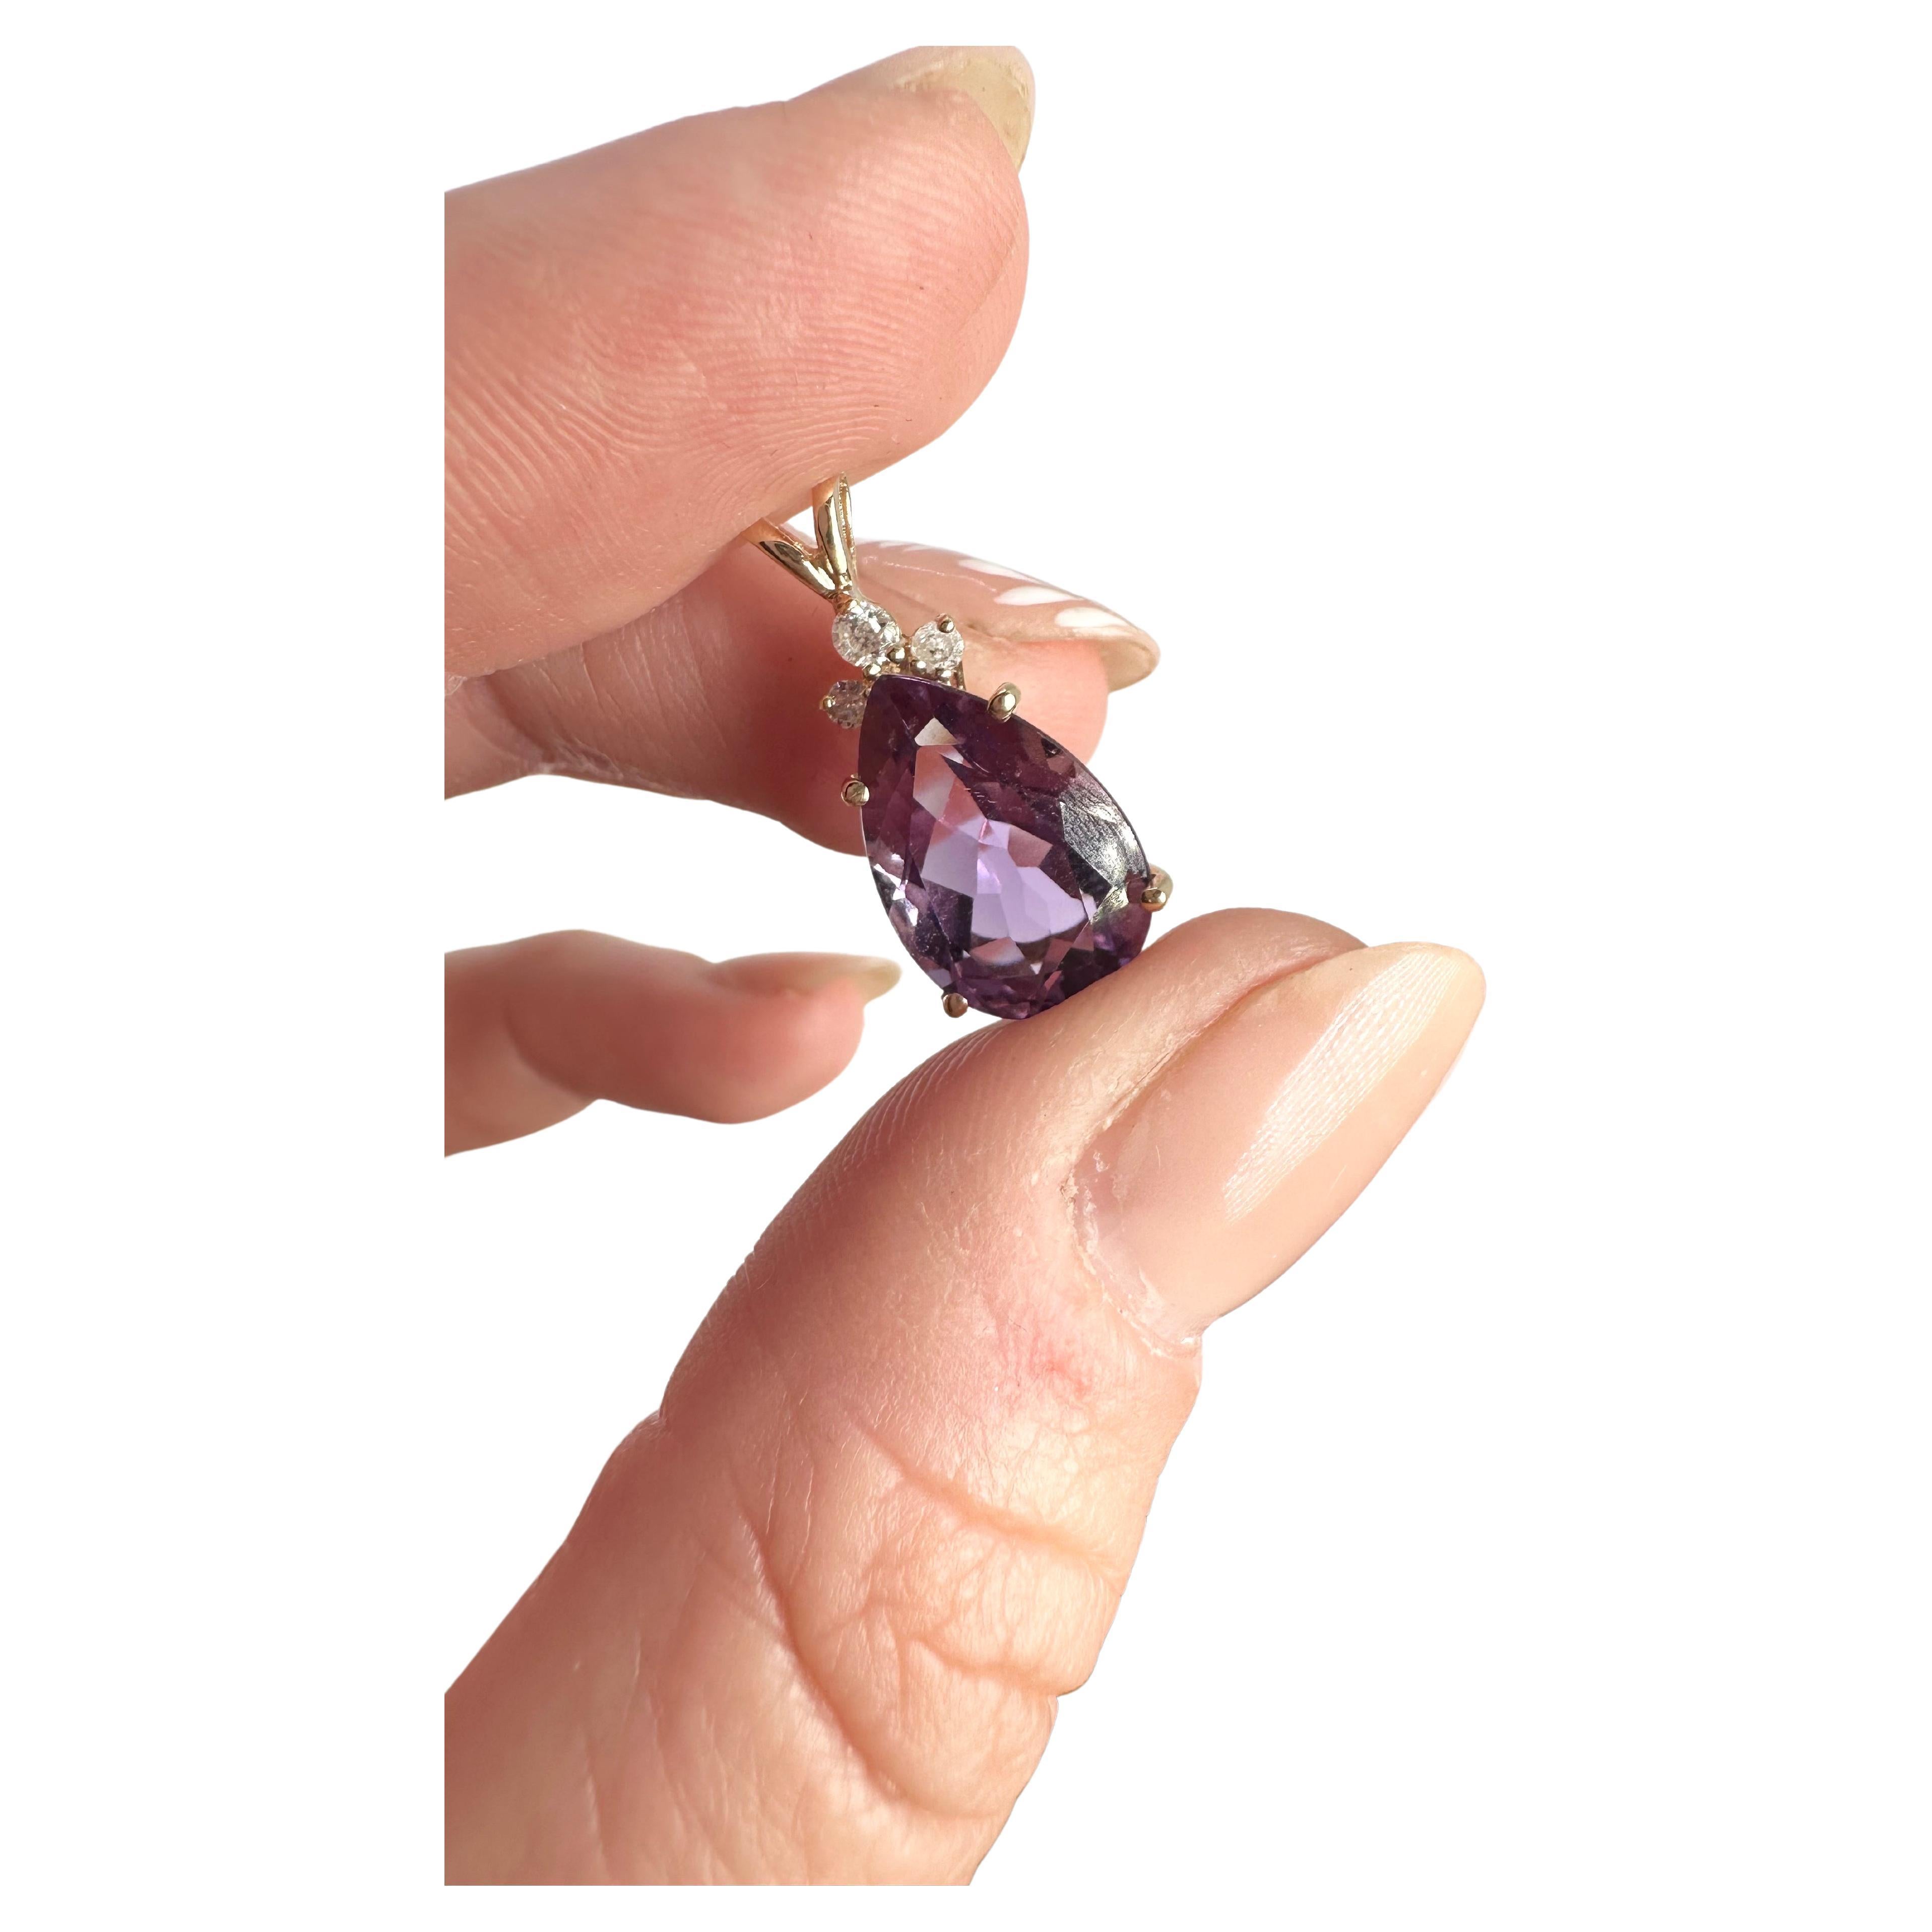 Simple, classy pendant necklace made with natural amethyst and diamonds in 14KT yellow gold!

GOLD: 14KT gold
NATURAL DIAMOND(S)
Clarity/Color: I/J
Carat:0.03ct
Cut:Round Brilliant
NATURAL AMETHYST (S)
Clarity:Slightly Included
Color: Purple